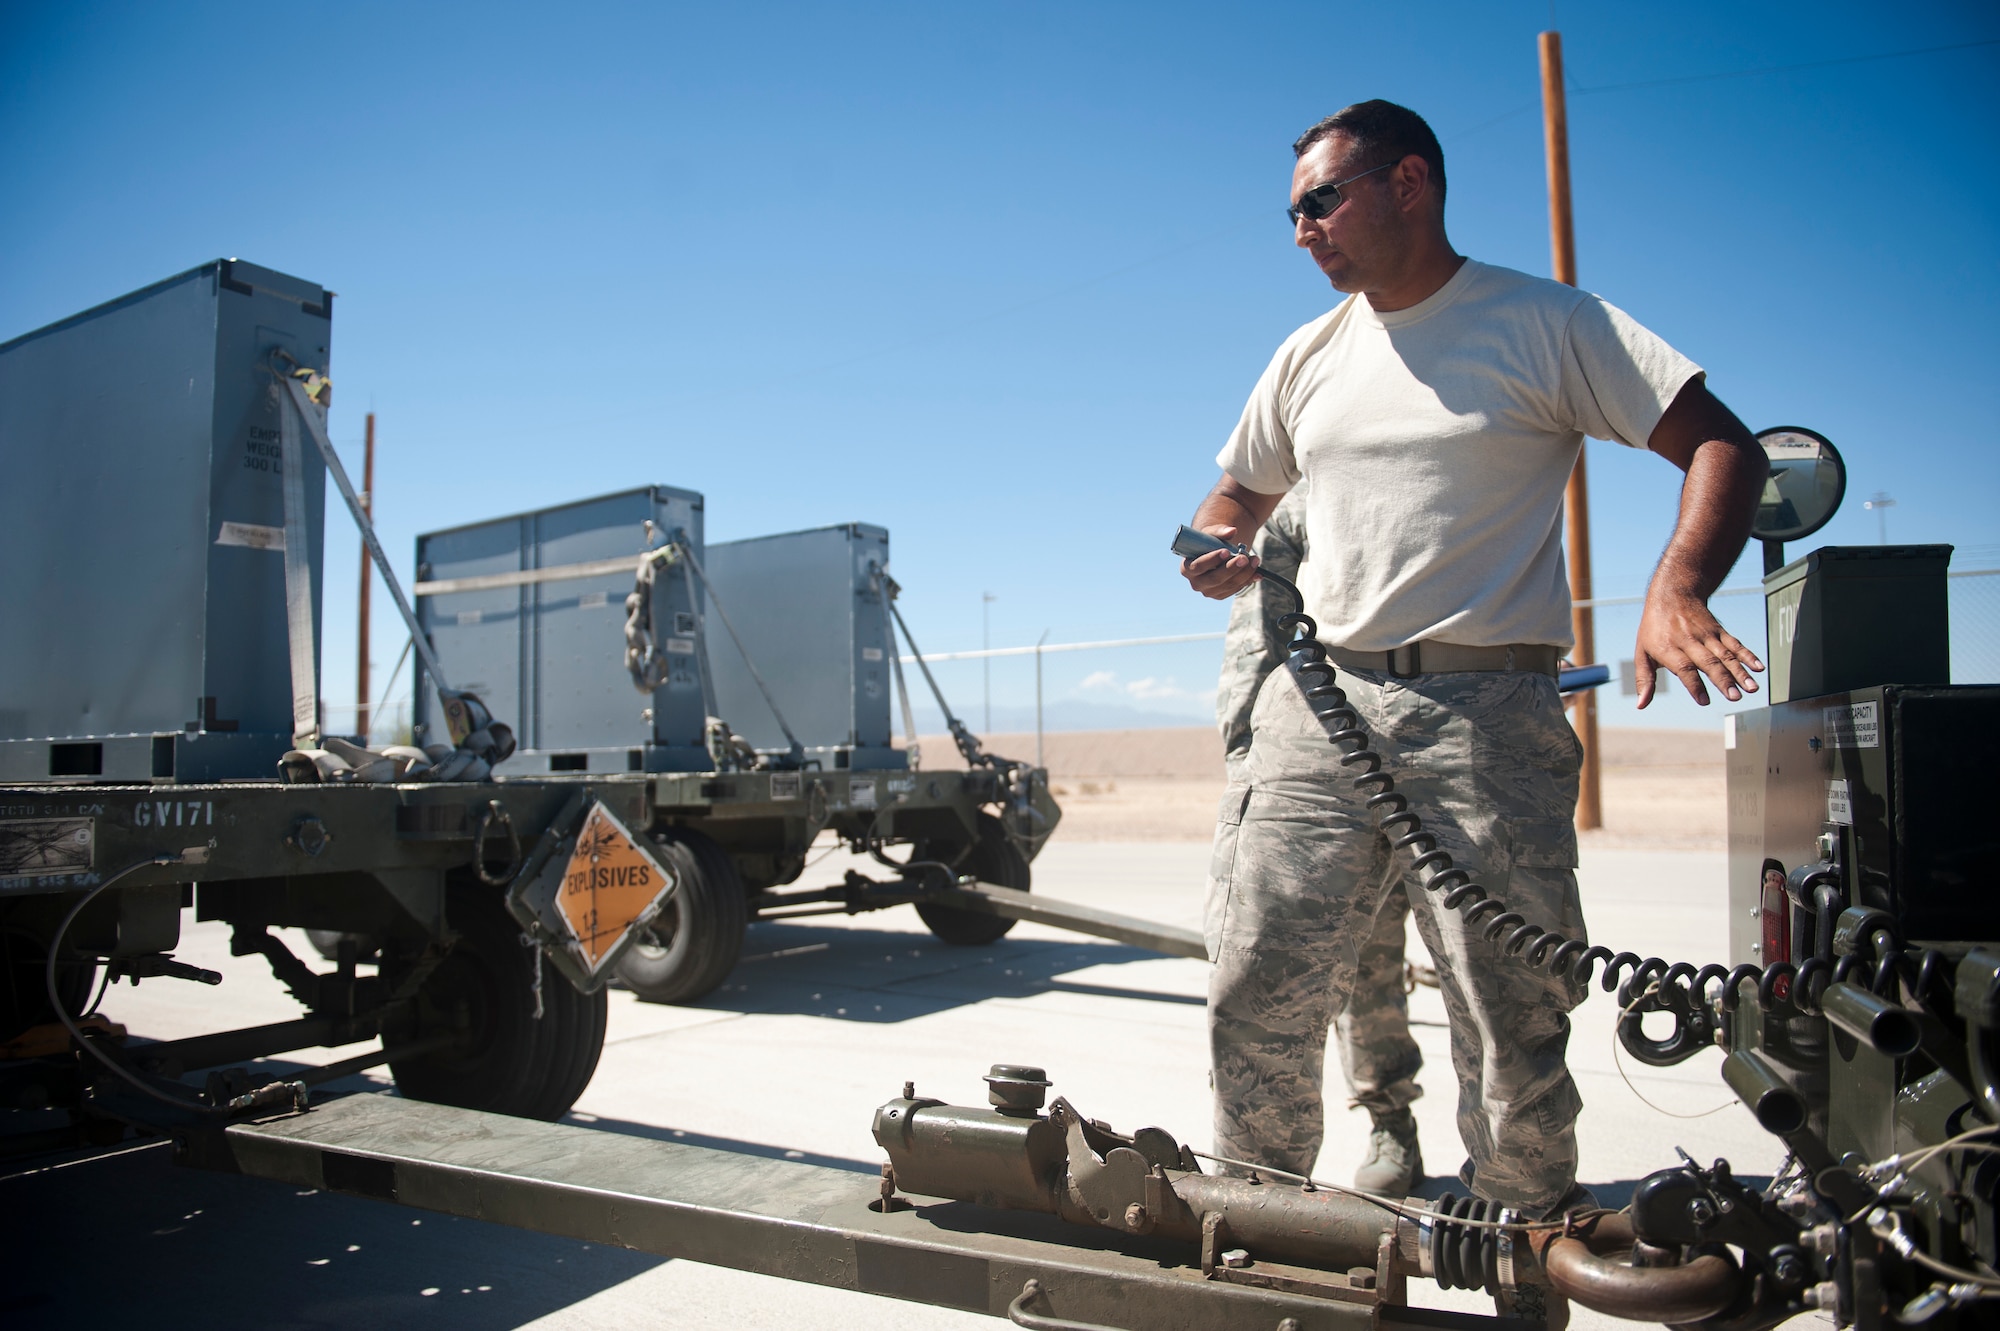 Senior Airman Miguel Vega, 57th Maintenance Squadron munitions line delivery crew chief, hooks up a light cable to a munitions trailer at Nellis Air Force Base, Nev., Sept. 19, 2014. To ensure their trucks and trailers are able to safely make multiple trips transporting munitions from the munitions storage area to the flight line – a distance of approximately eight miles – each driver is held responsible for the daily accounting and maintenance of their equipment. (U.S. Air Force photo by Staff Sgt. Siuta B. Ika)